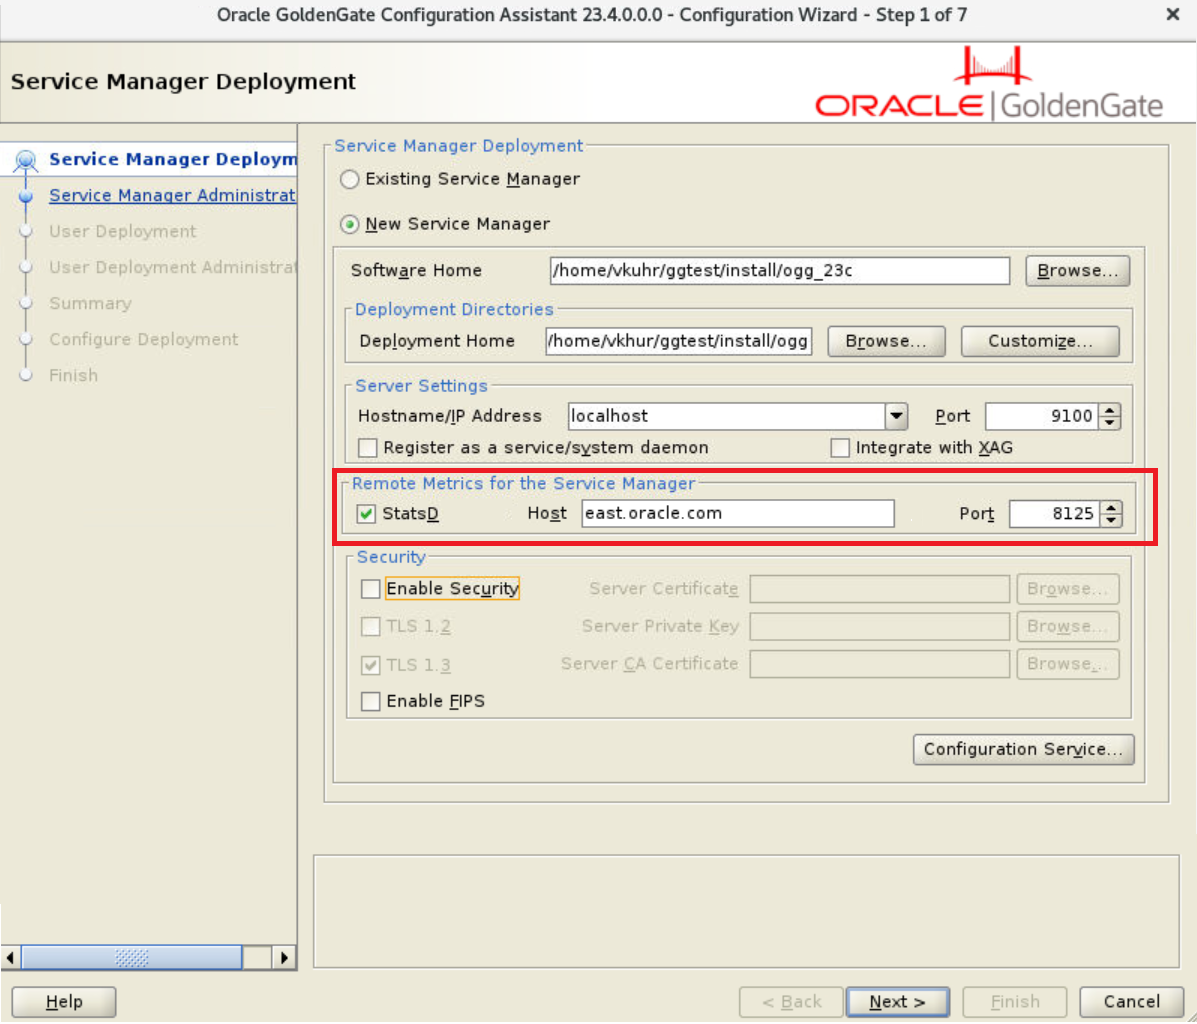 OGGCA Service Manager deployment screen with the StatsD option enabled